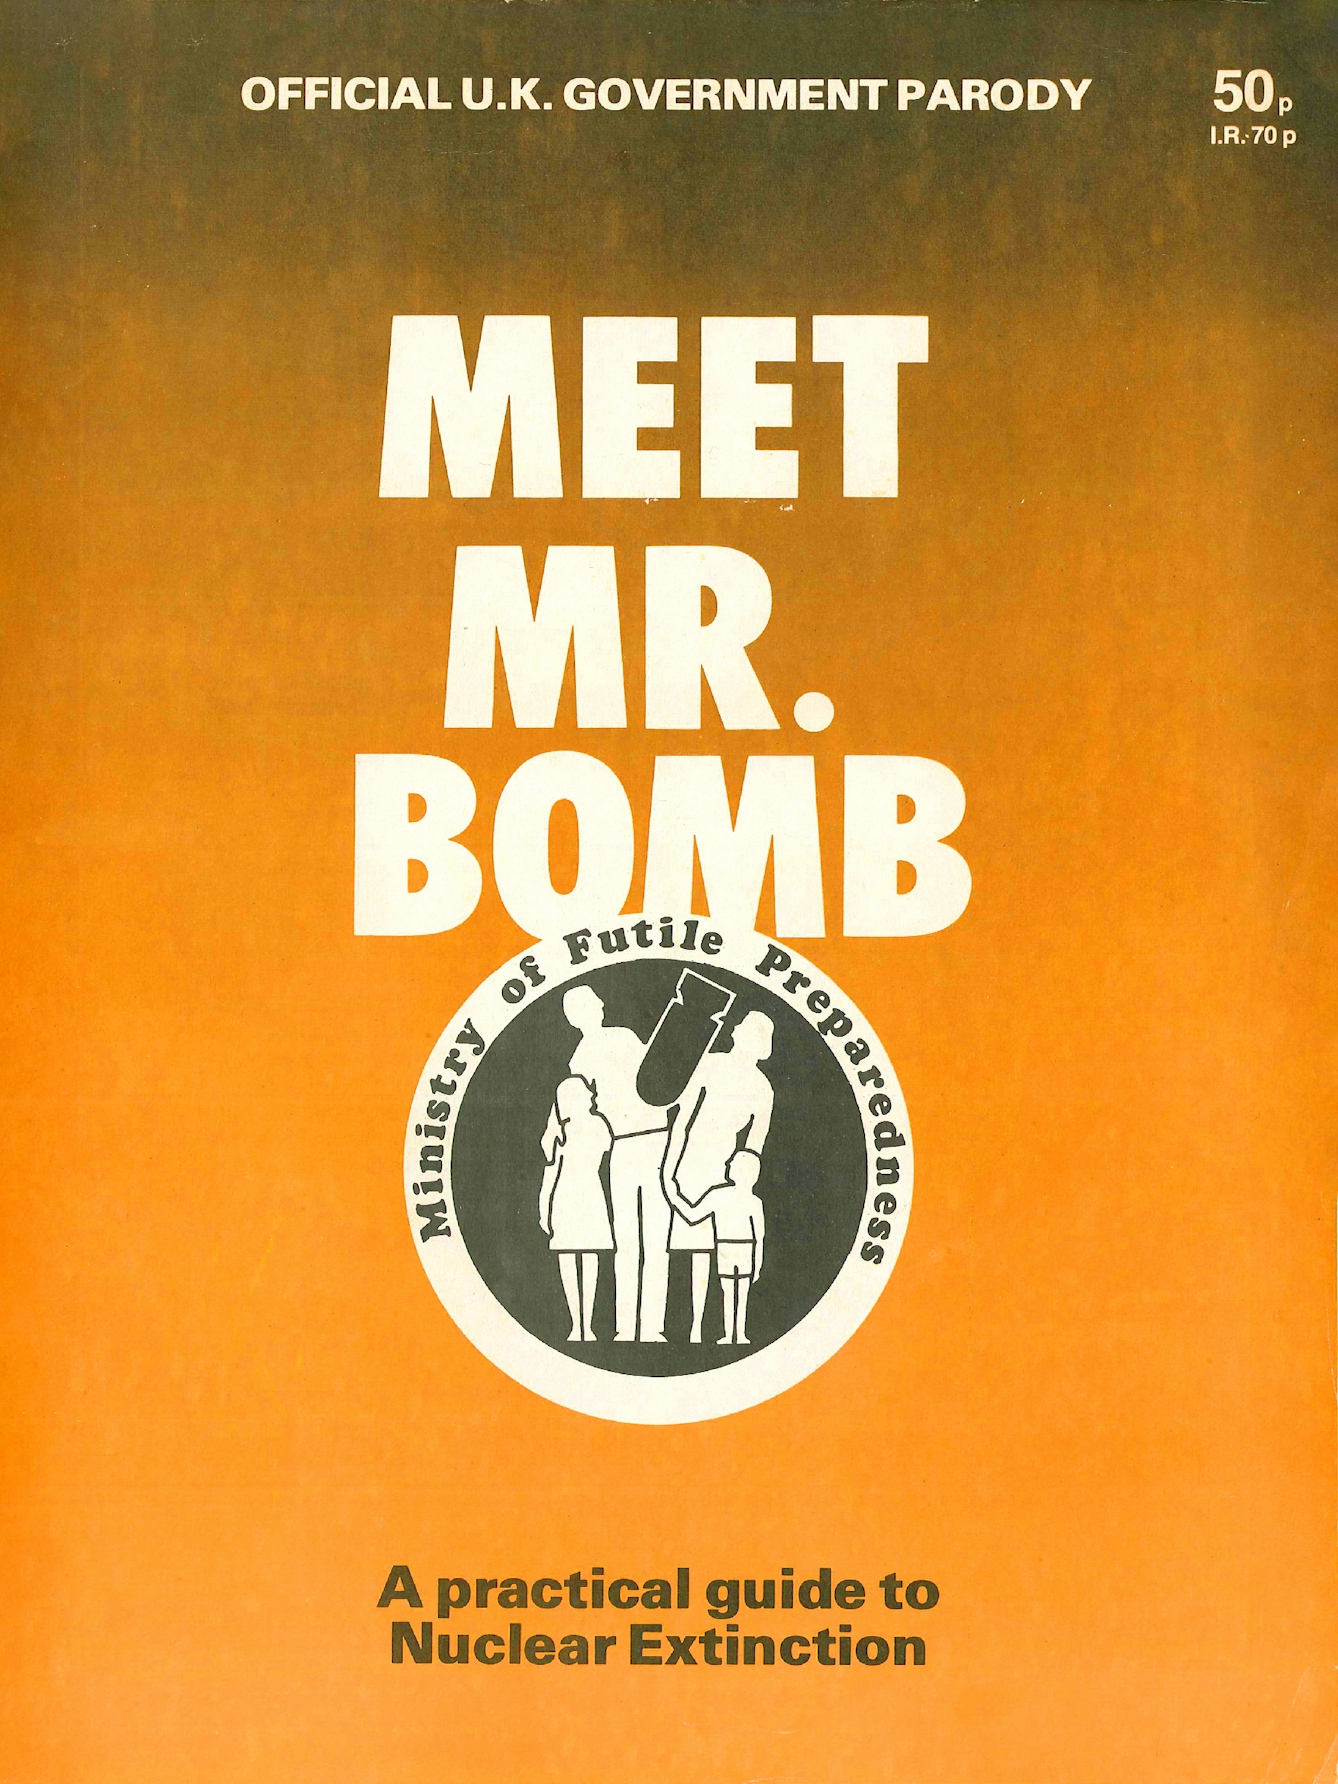 The cover of a pamphlet titled 'Meet Mr Bomb'.